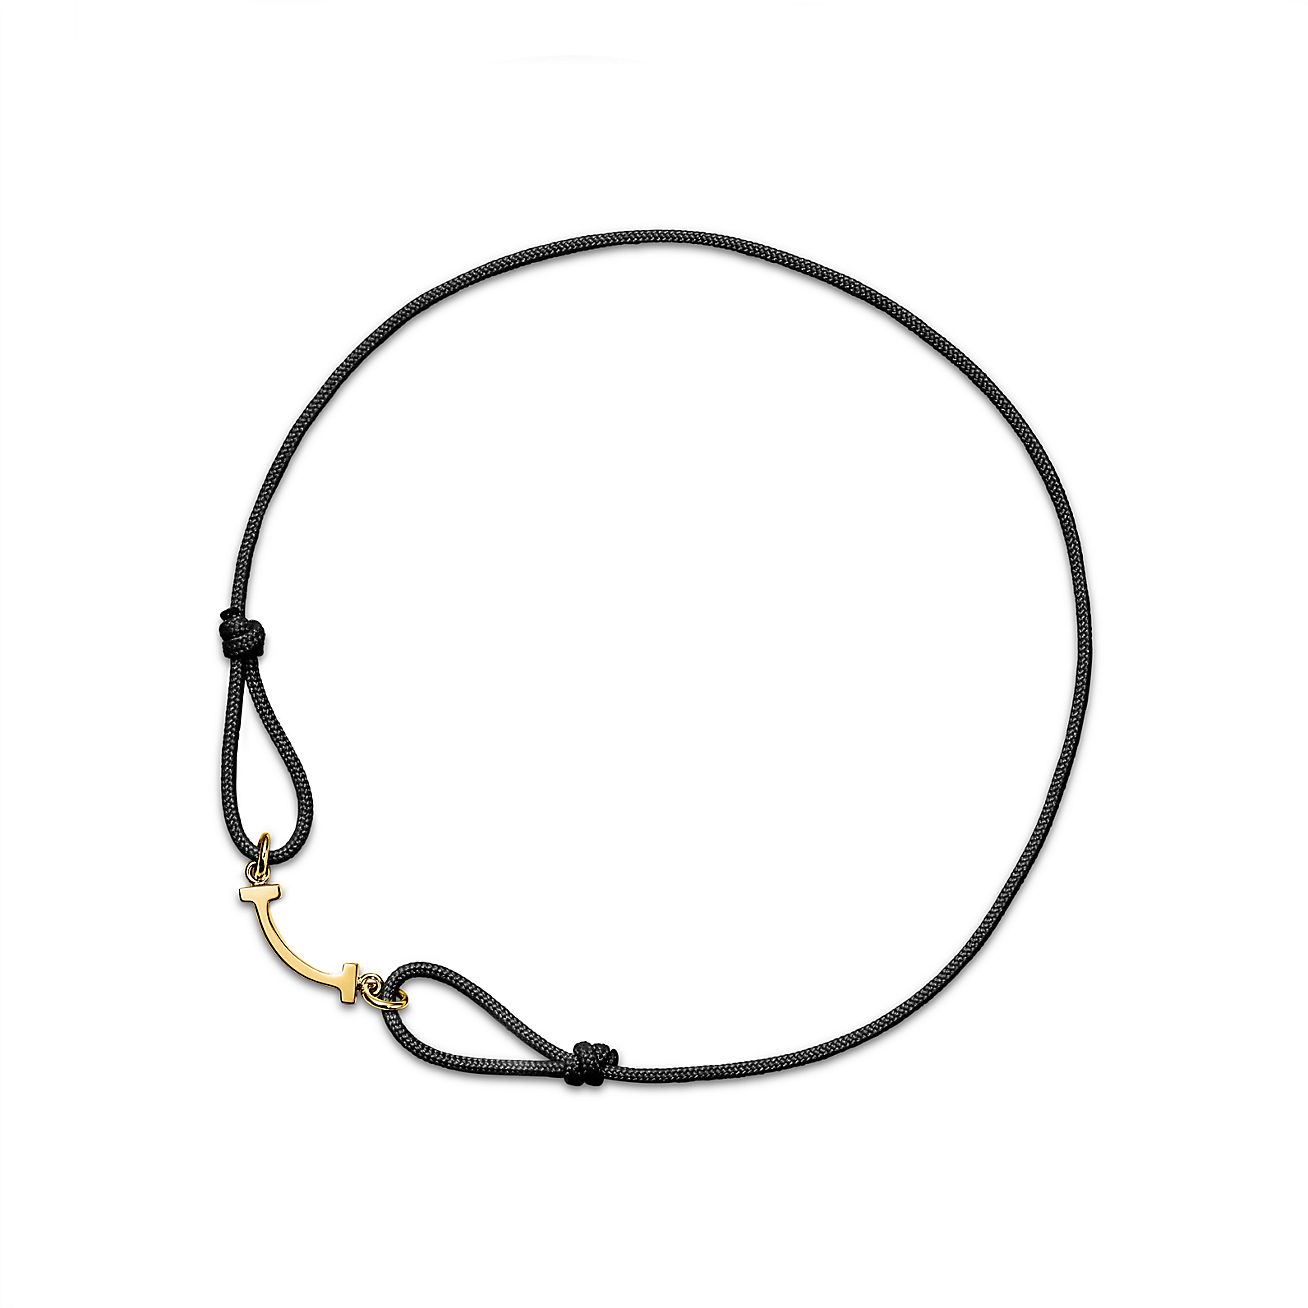 Tiffany T Smile Bracelet in Yellow Gold on a Black Cord